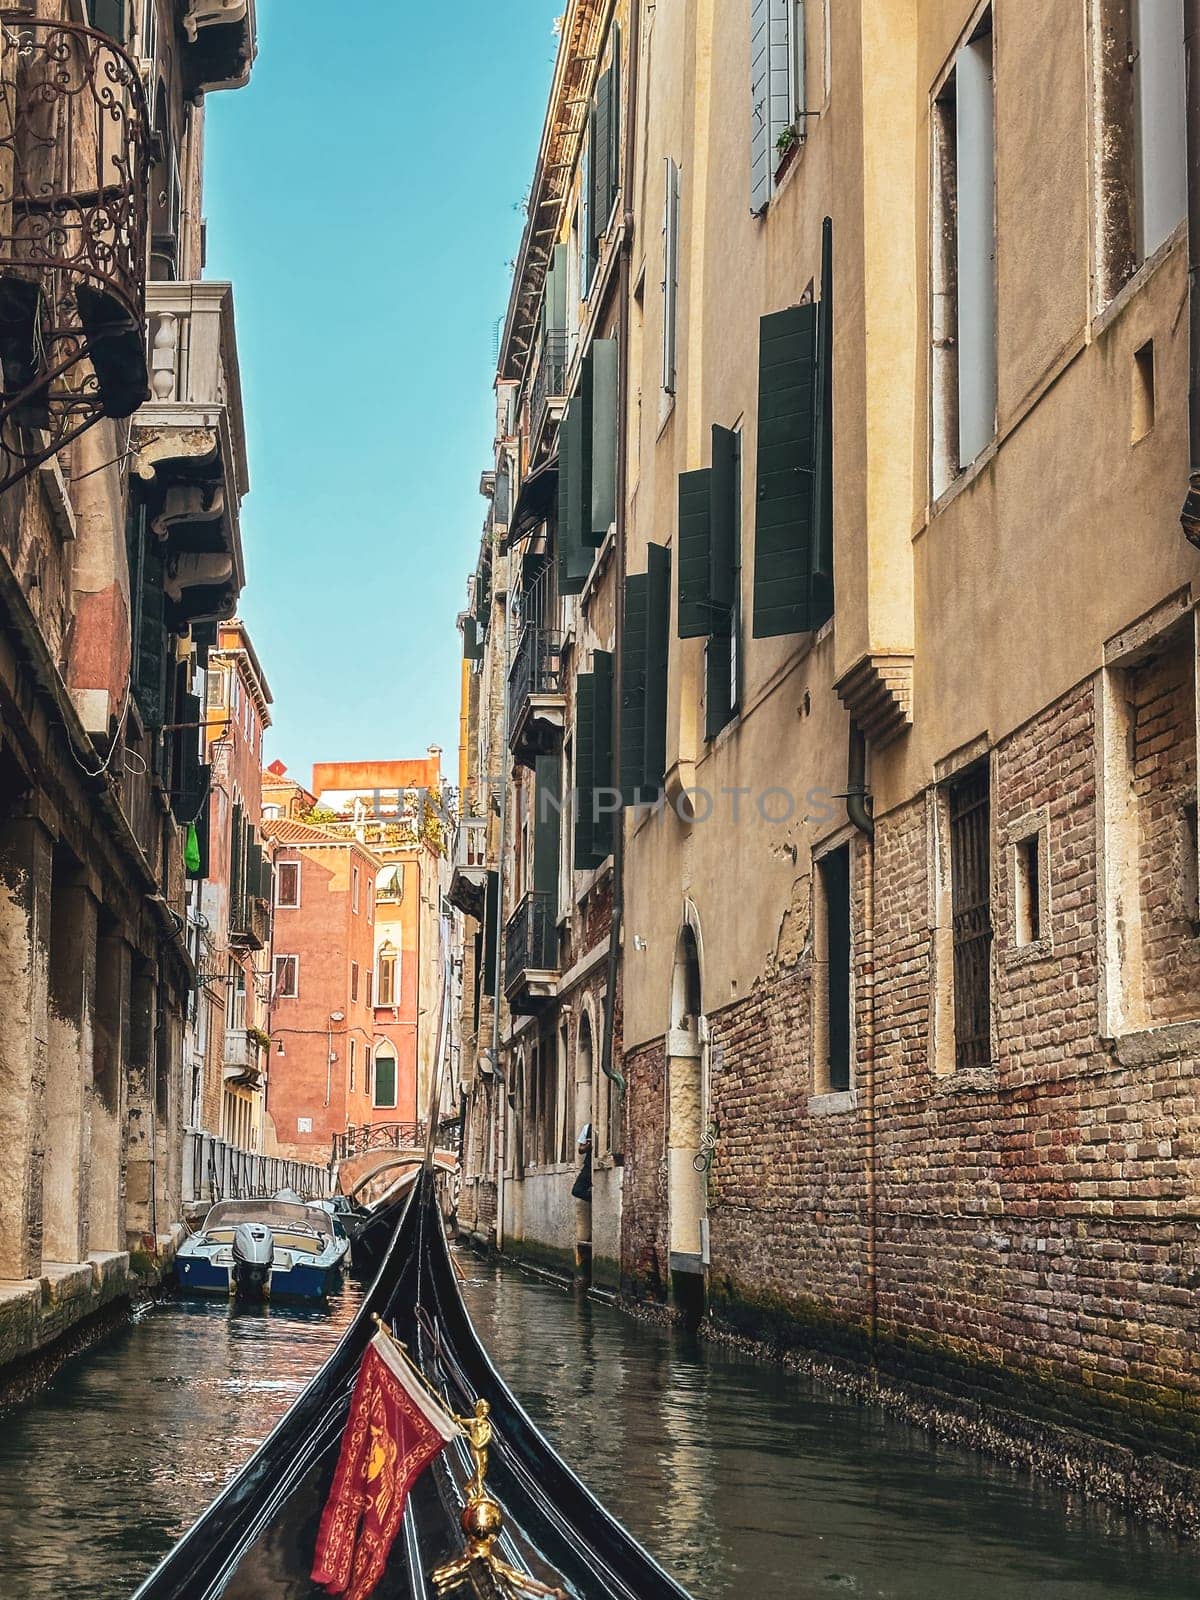 Gondola moving between houses in narrow canals within the city of Venice, Italy by Sonat